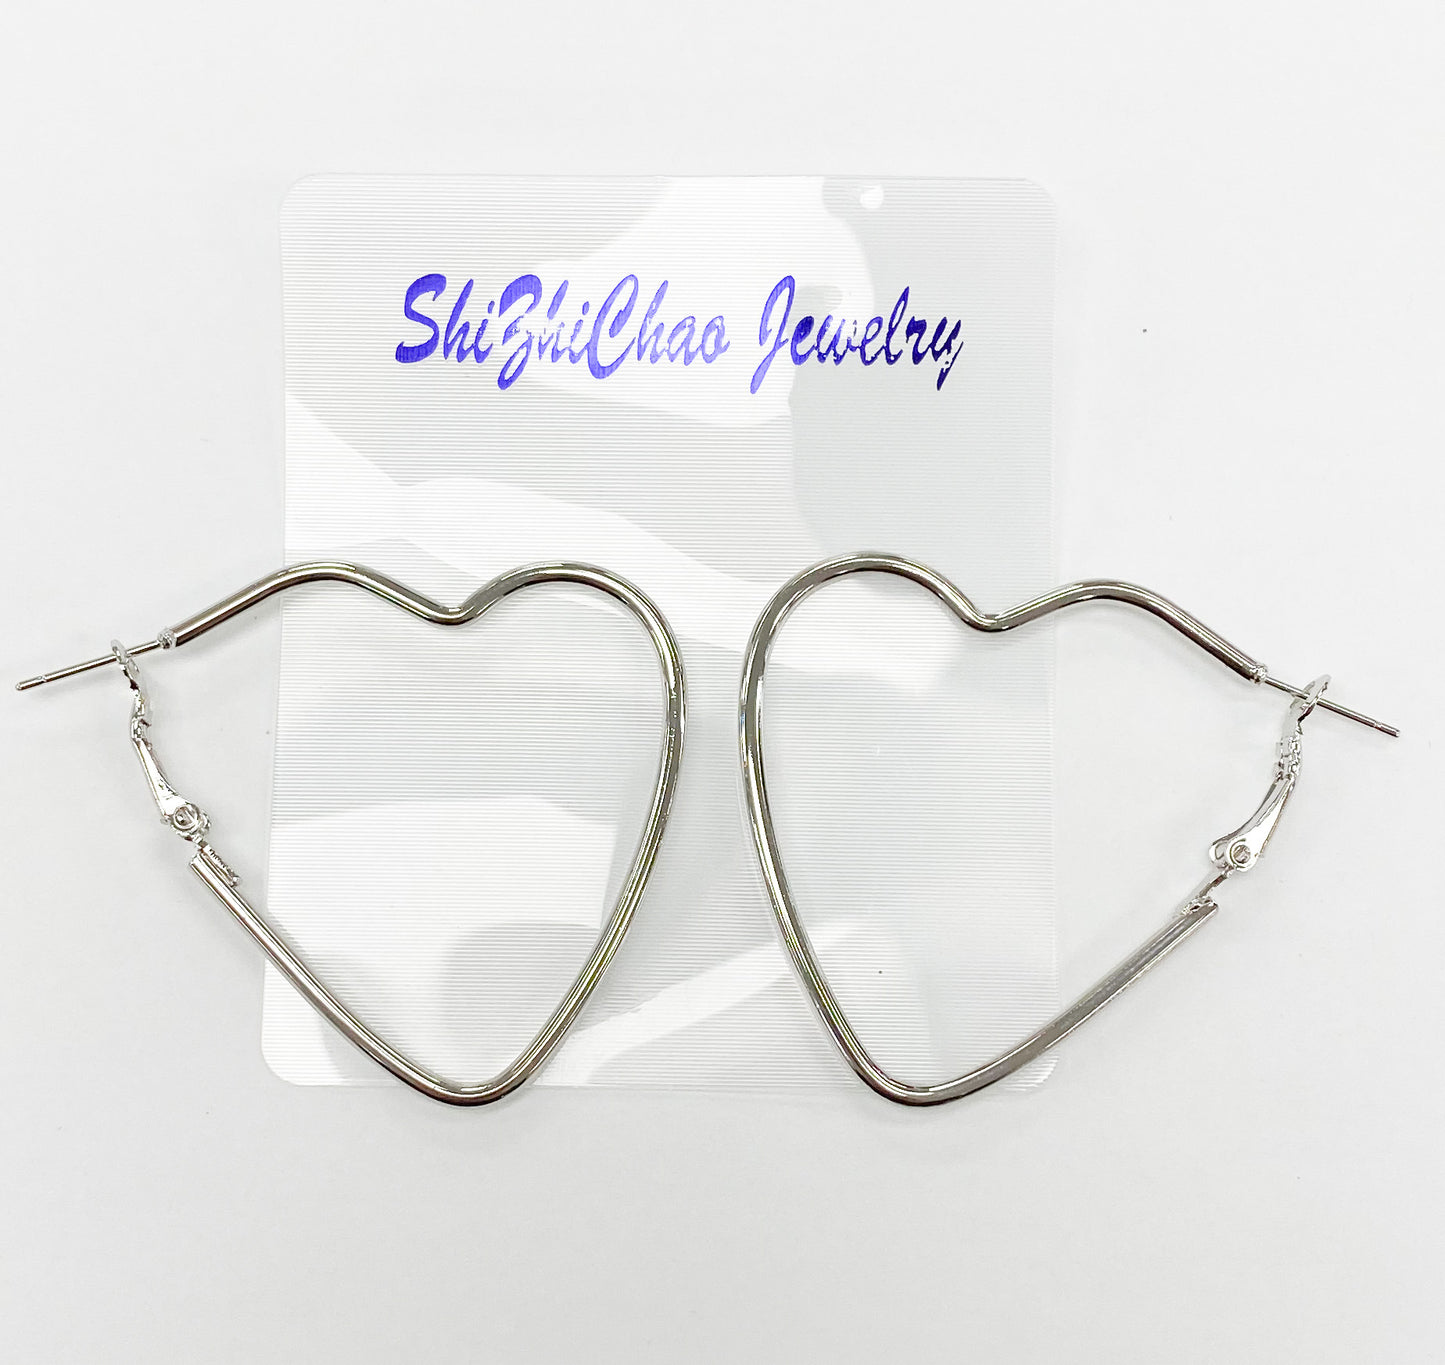 50mm x 43mm Silver Heart Shaped Earring For Beading Around, 2mm Thickness